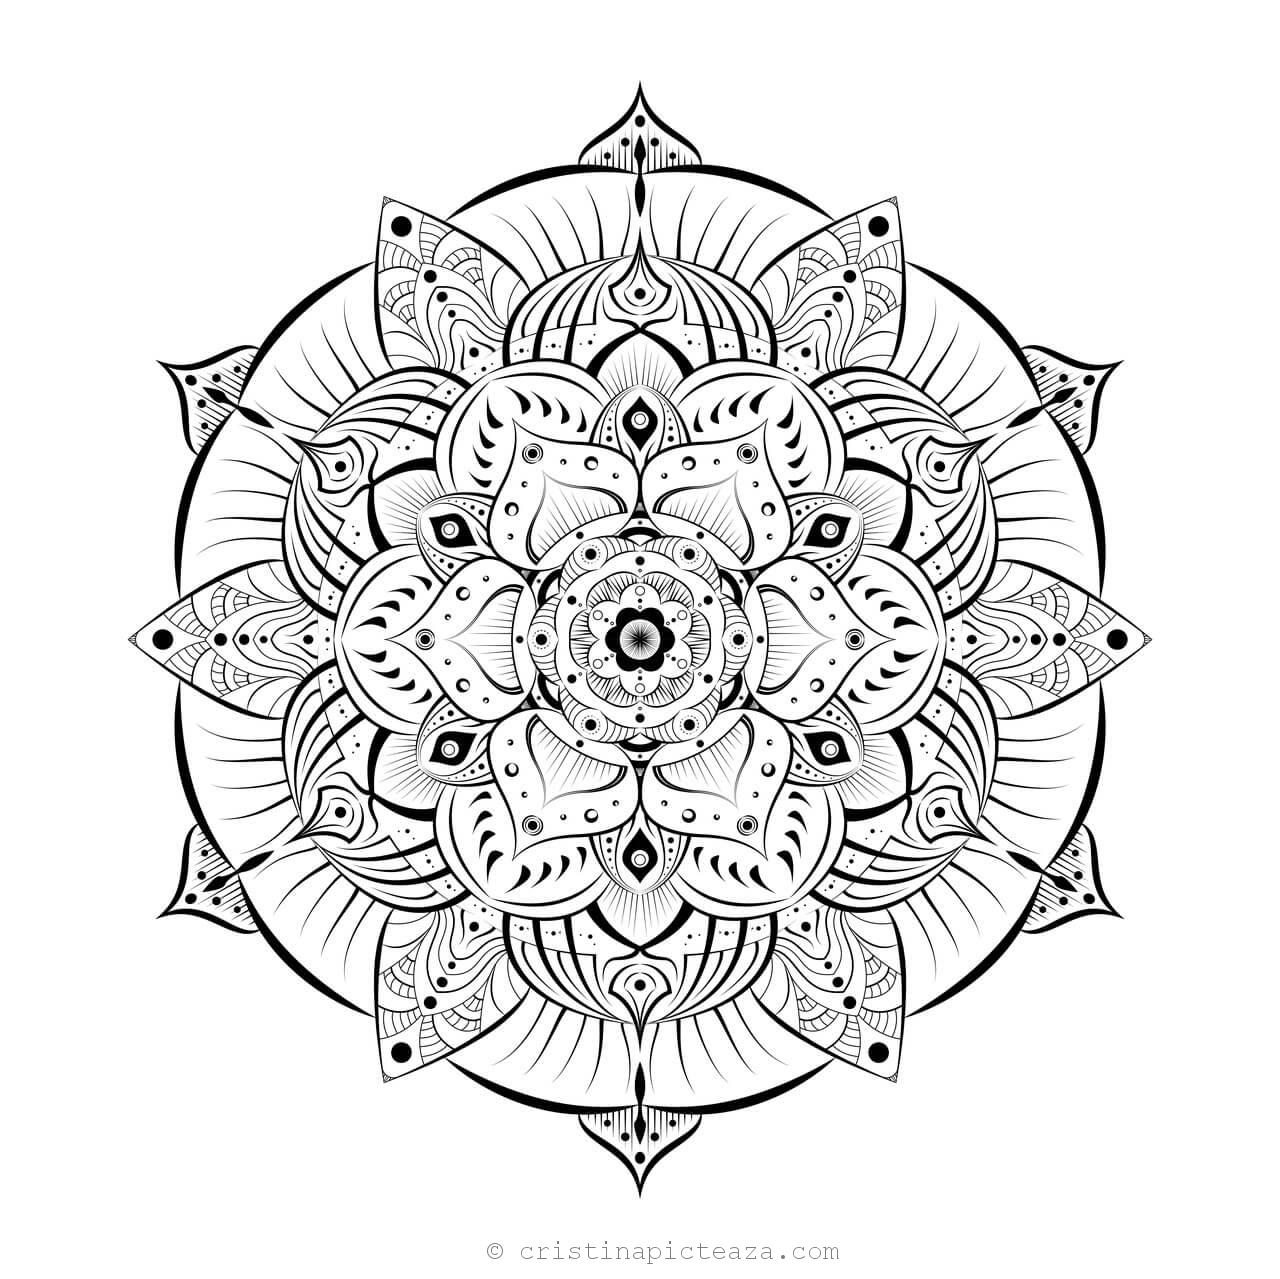 Coloring Pages With Mandala Mandala For Coloring